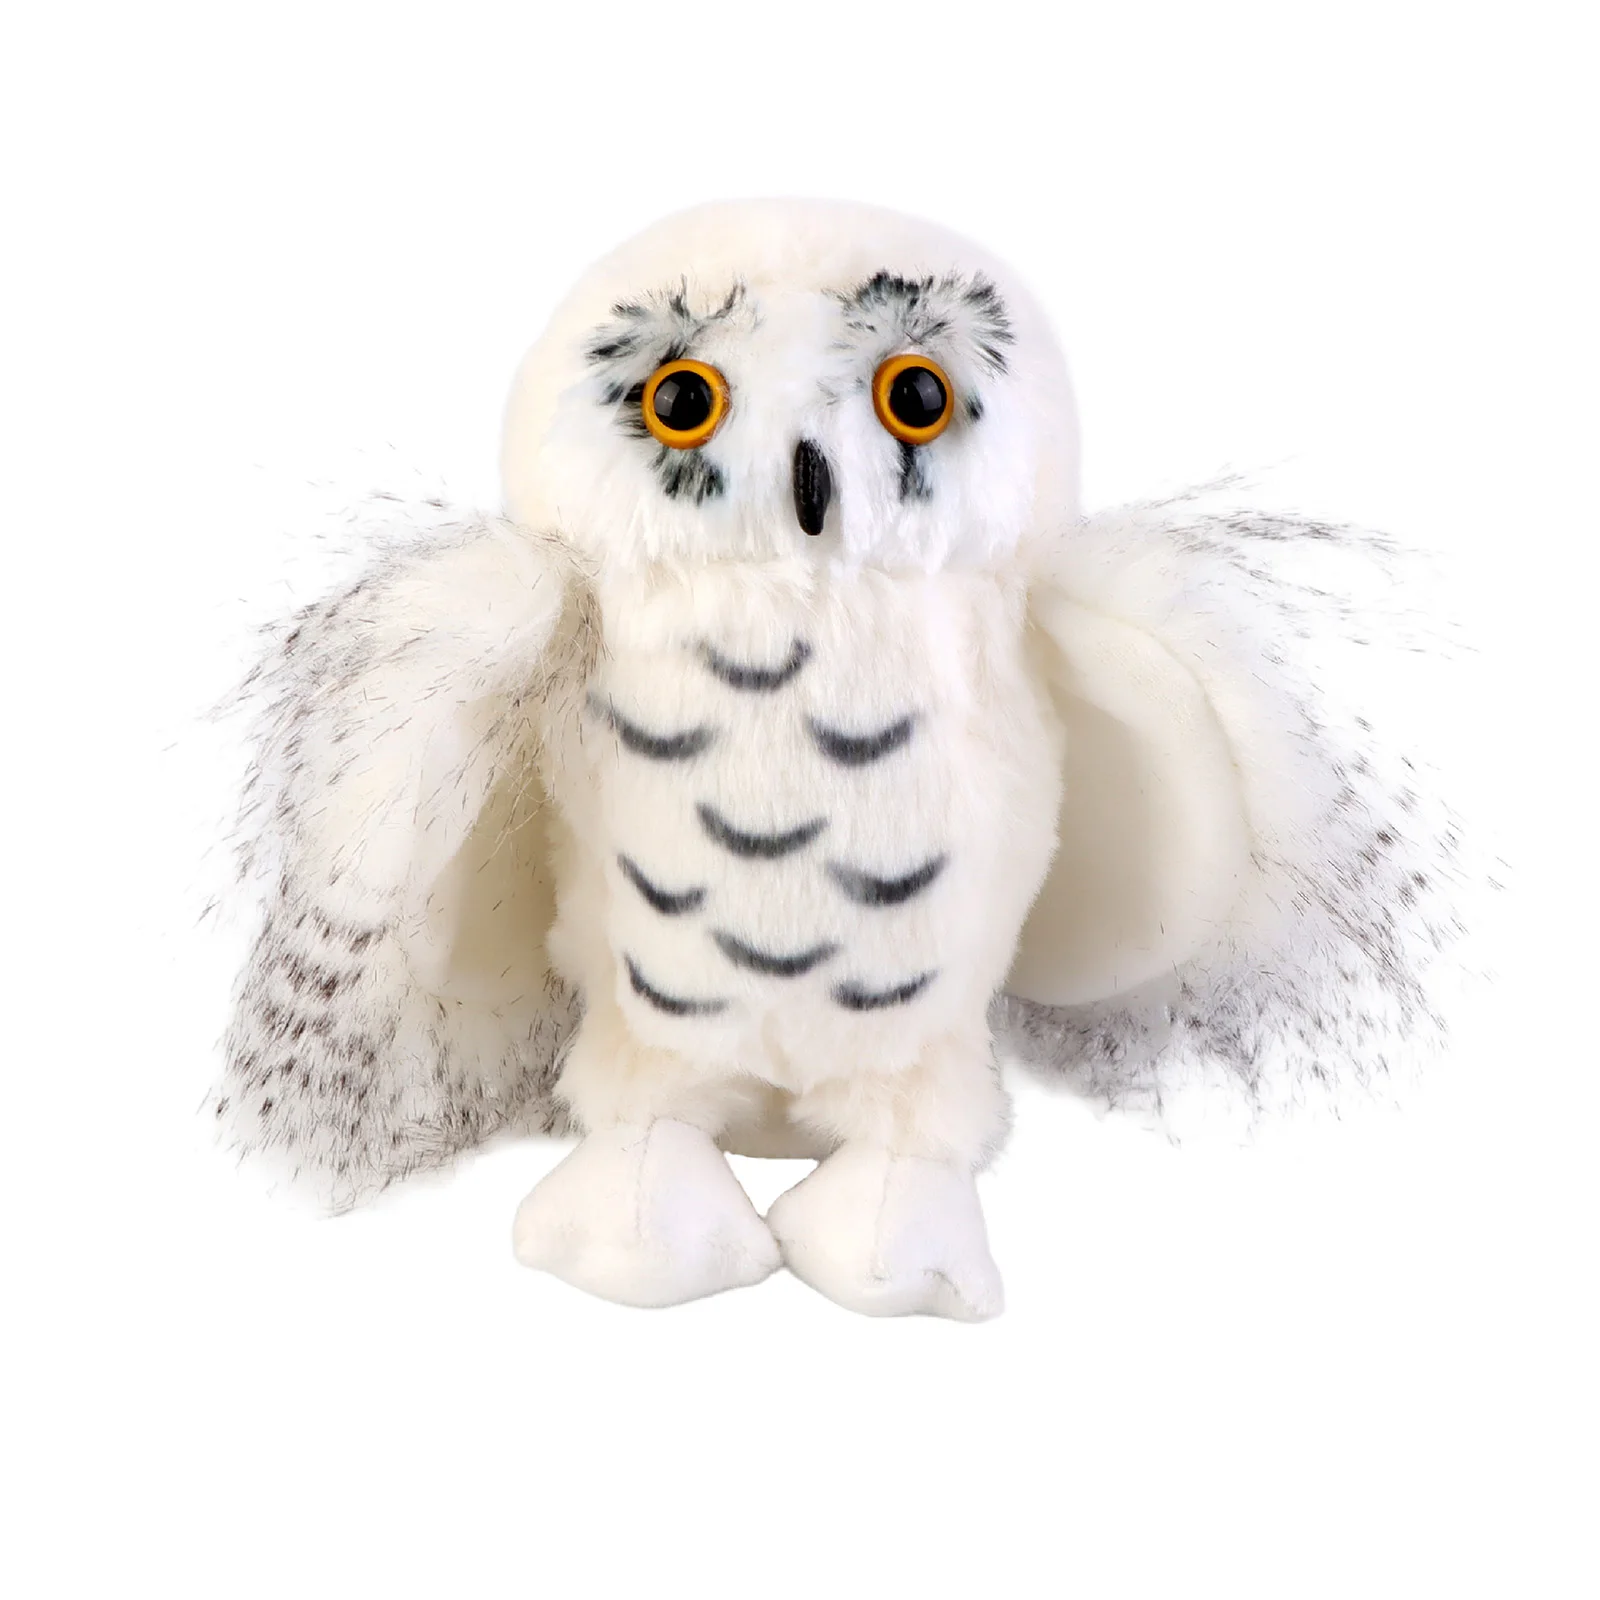 

25cm/8.66inch Cute Snowy Owl Stuffed Animal Plushie,Brave Boy's and Girl's Room Owls Plush Decor,Kids Gifts for Birthday Valenti